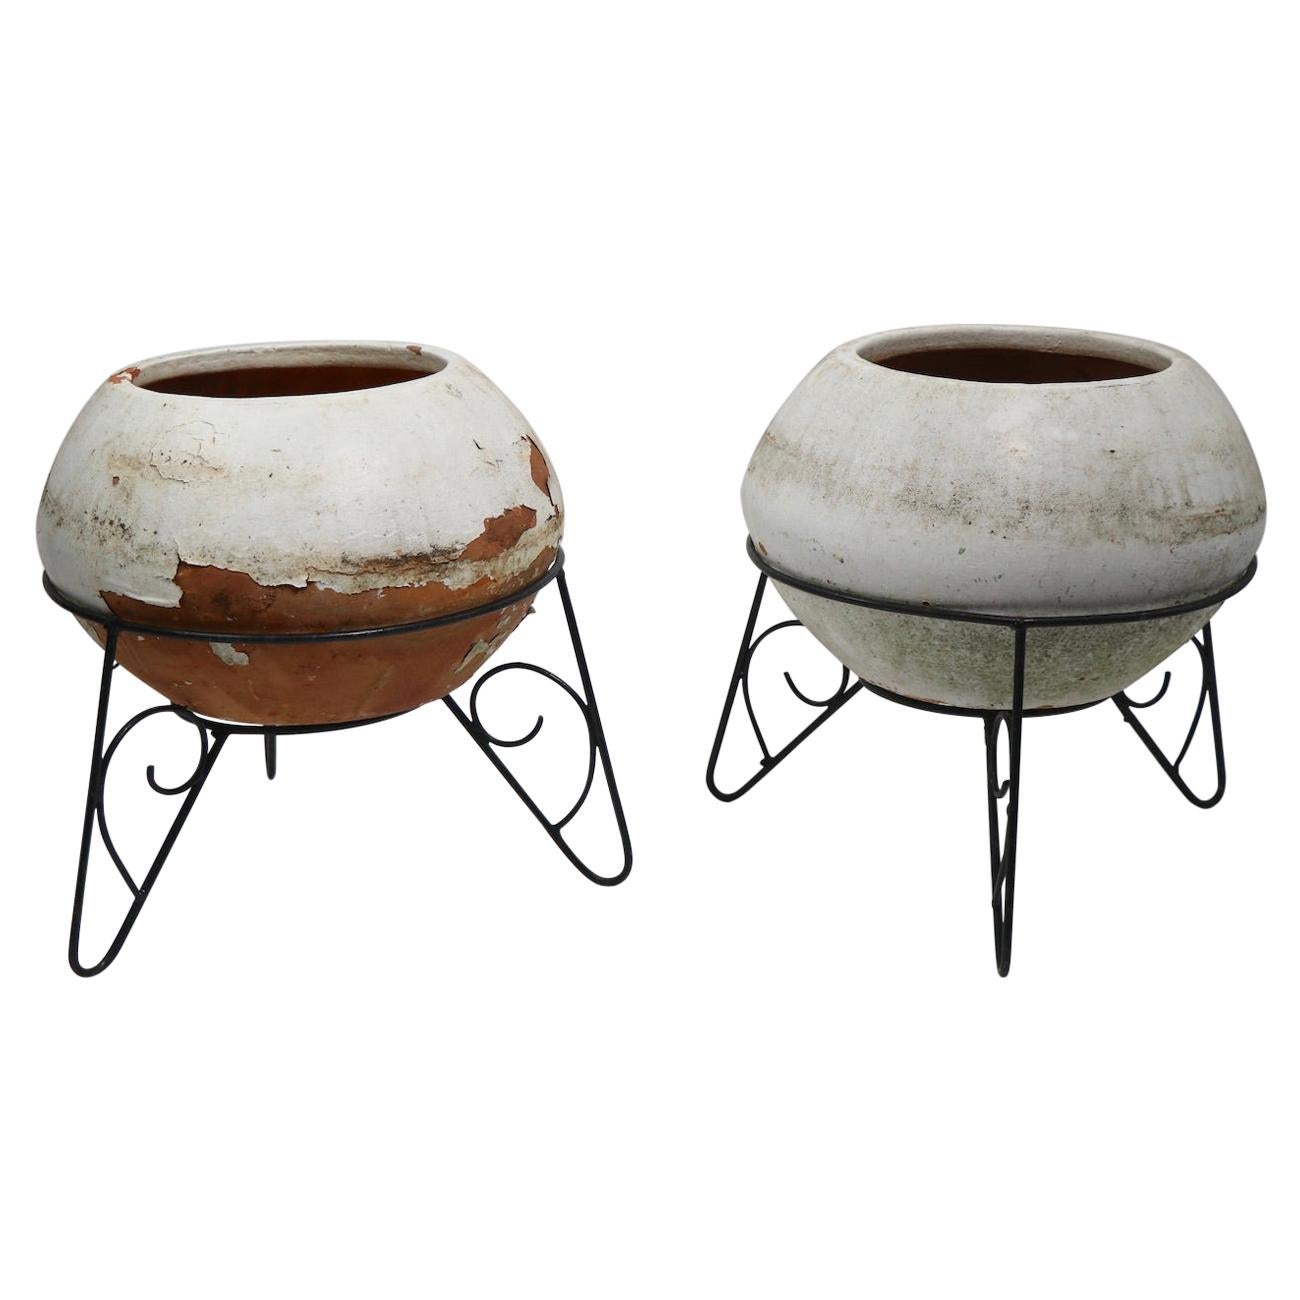 Pair of Mid Century Terracotta Planters in Wrought Iron Stands